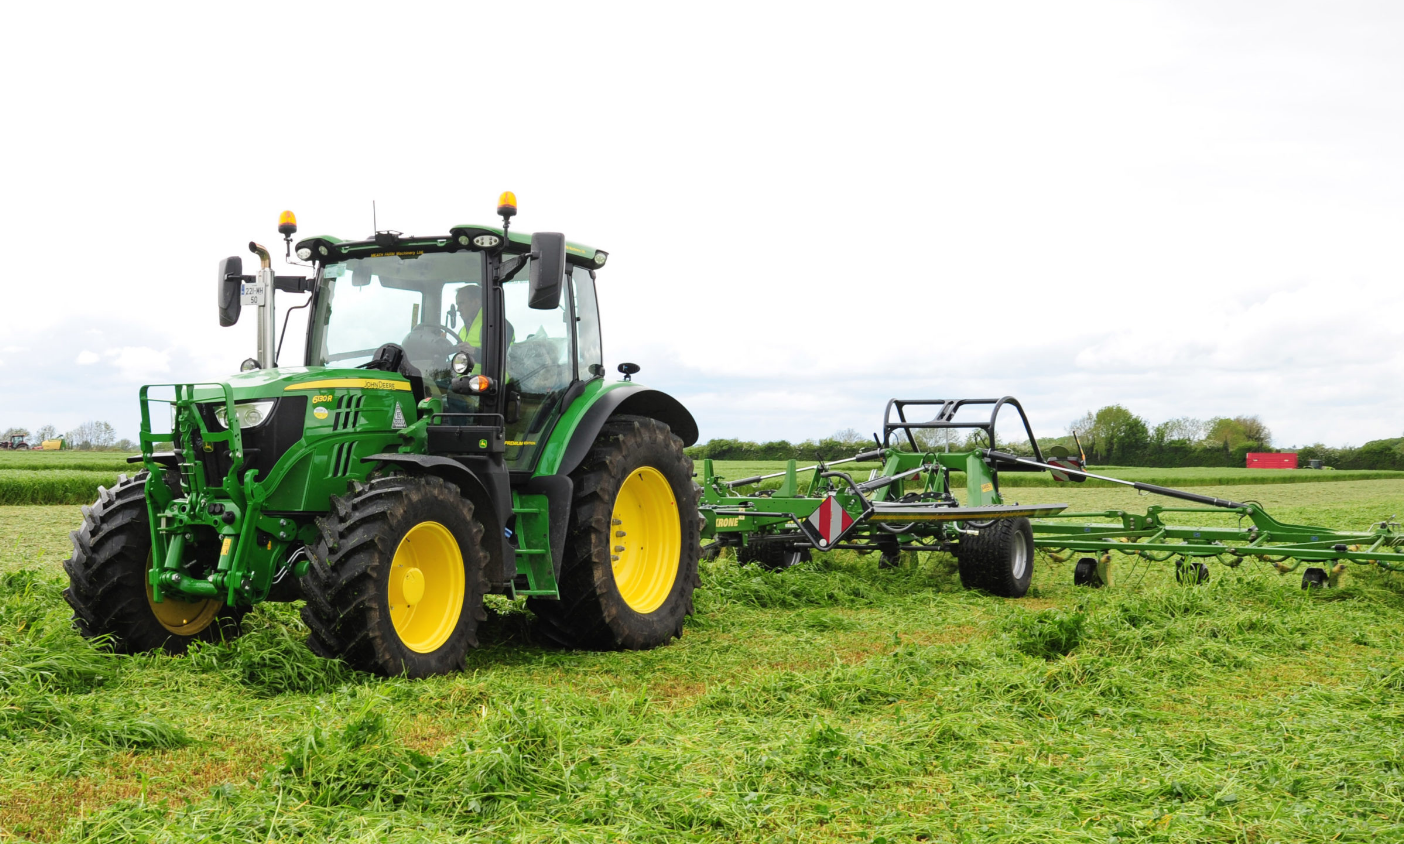 John Deere gives competitors access to use its digital control system on farm equipment